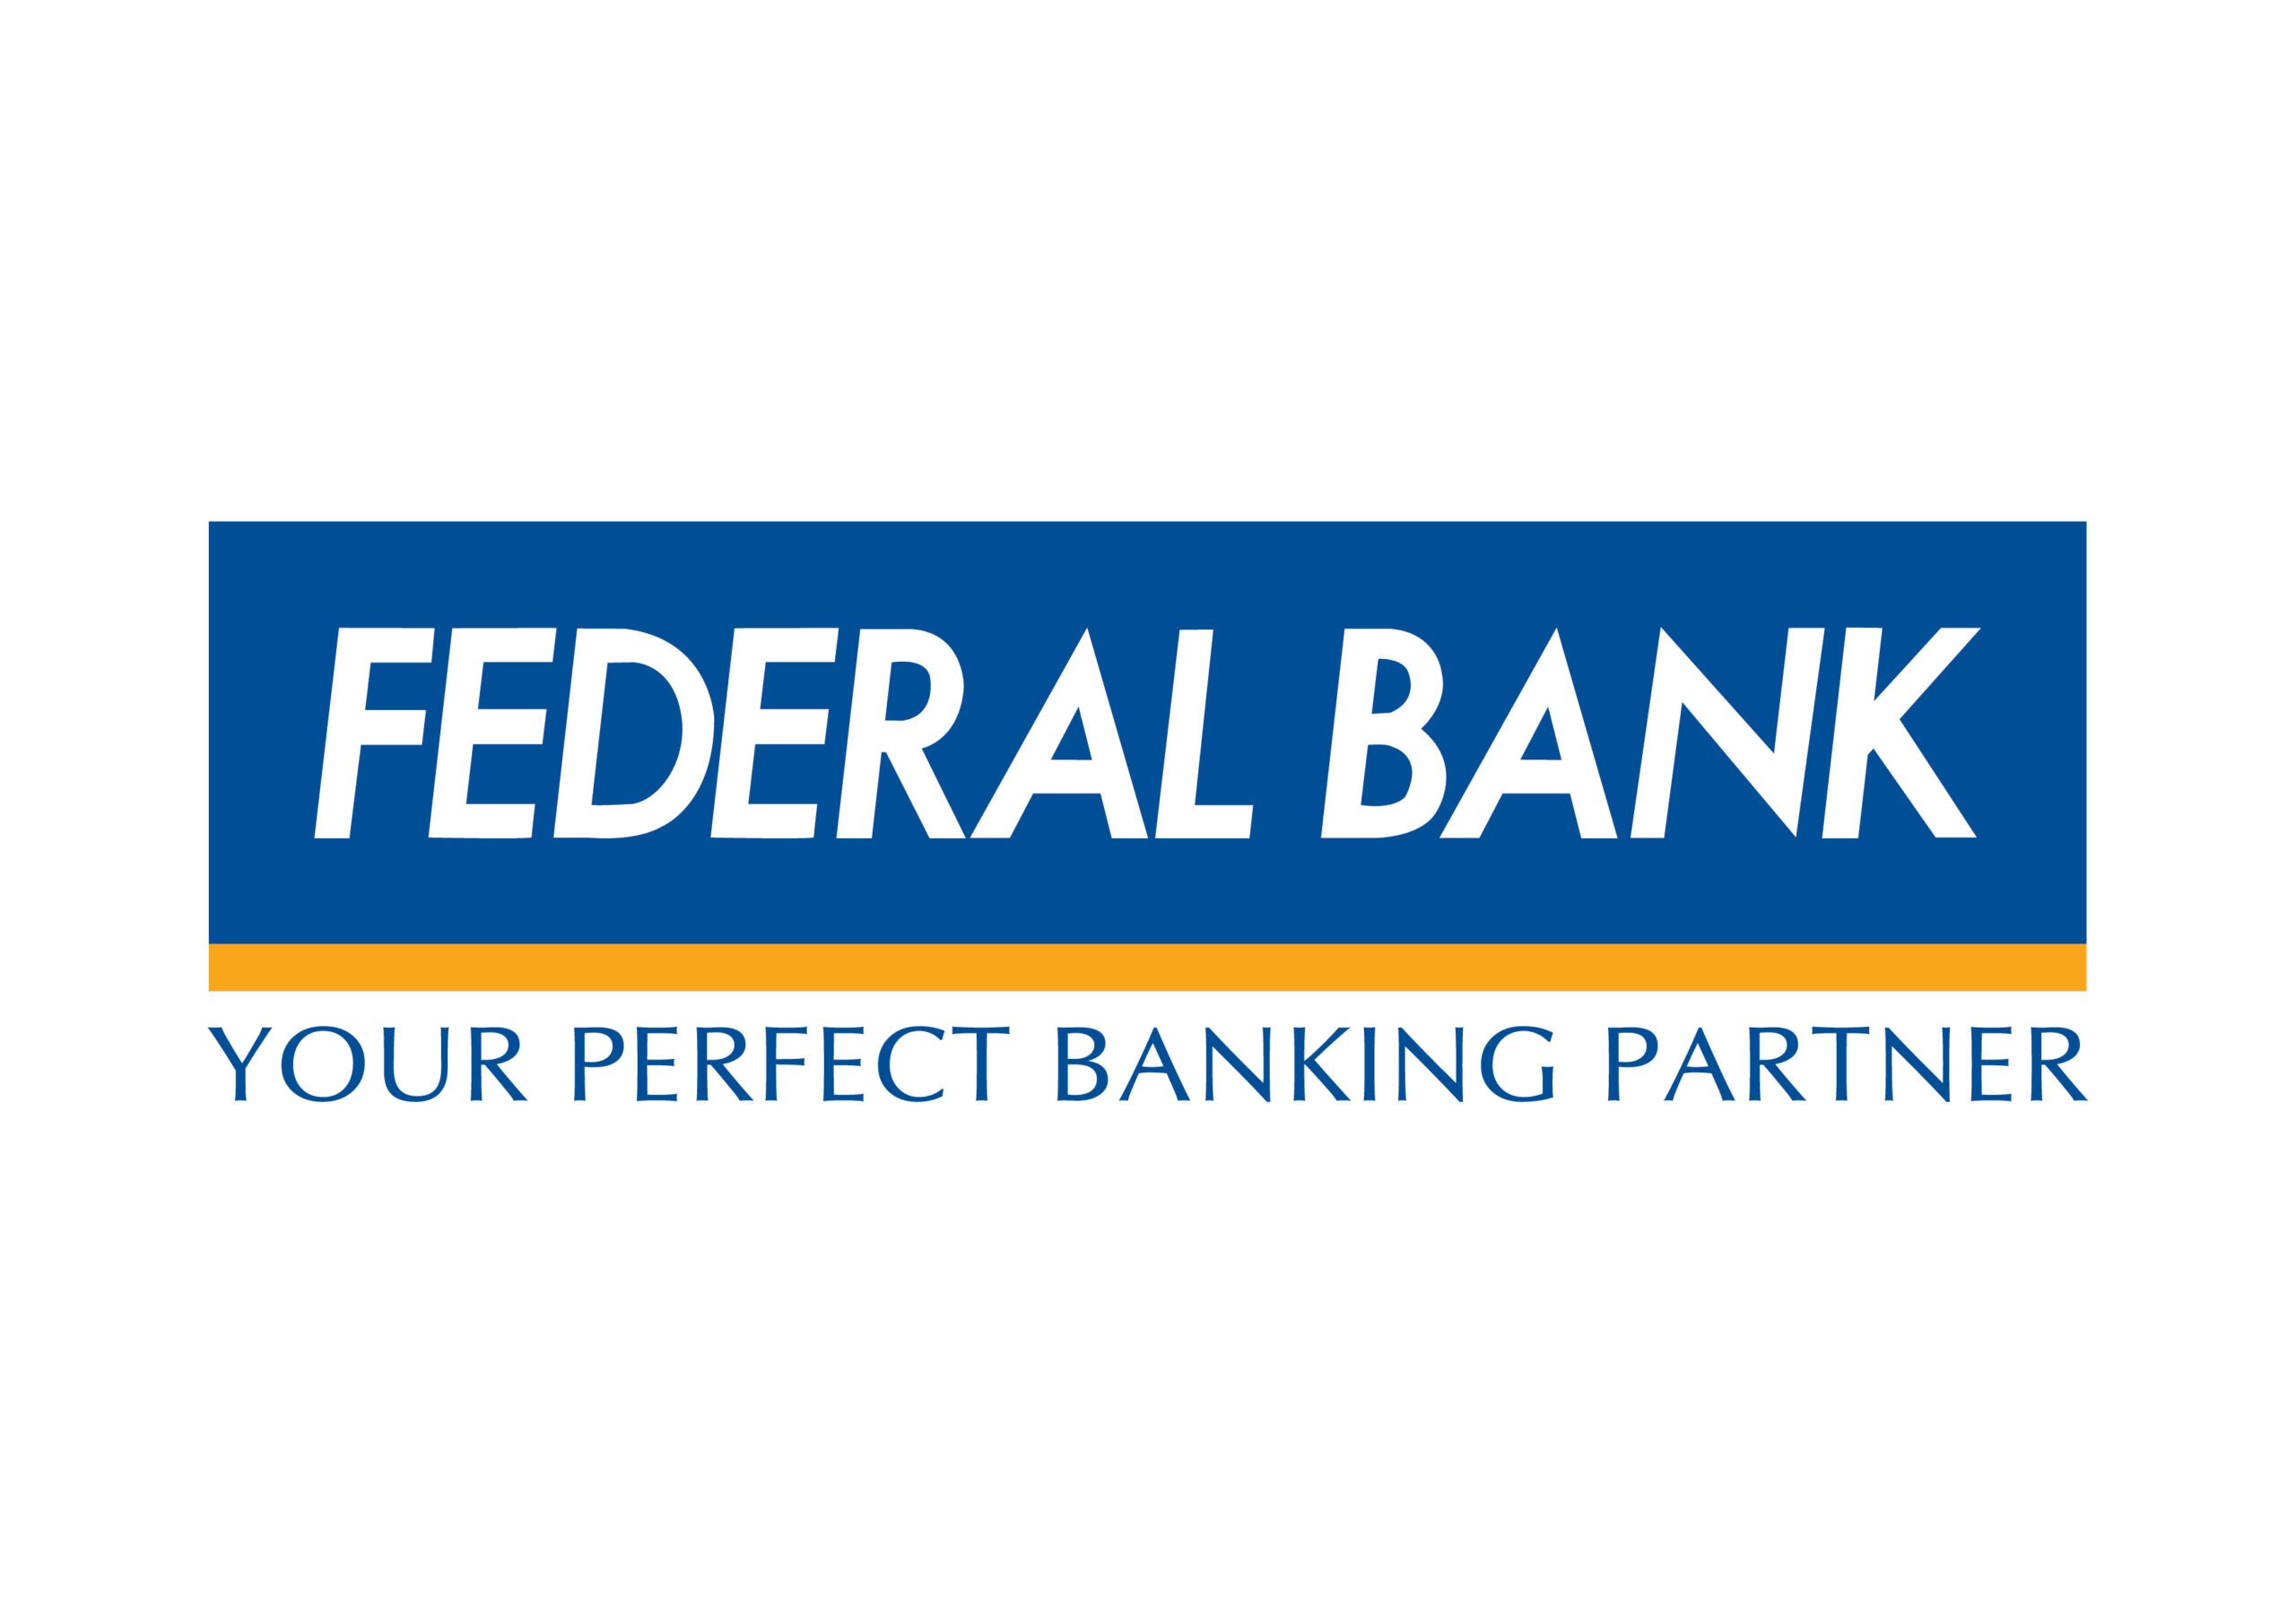 Federal Bank Q2 Results